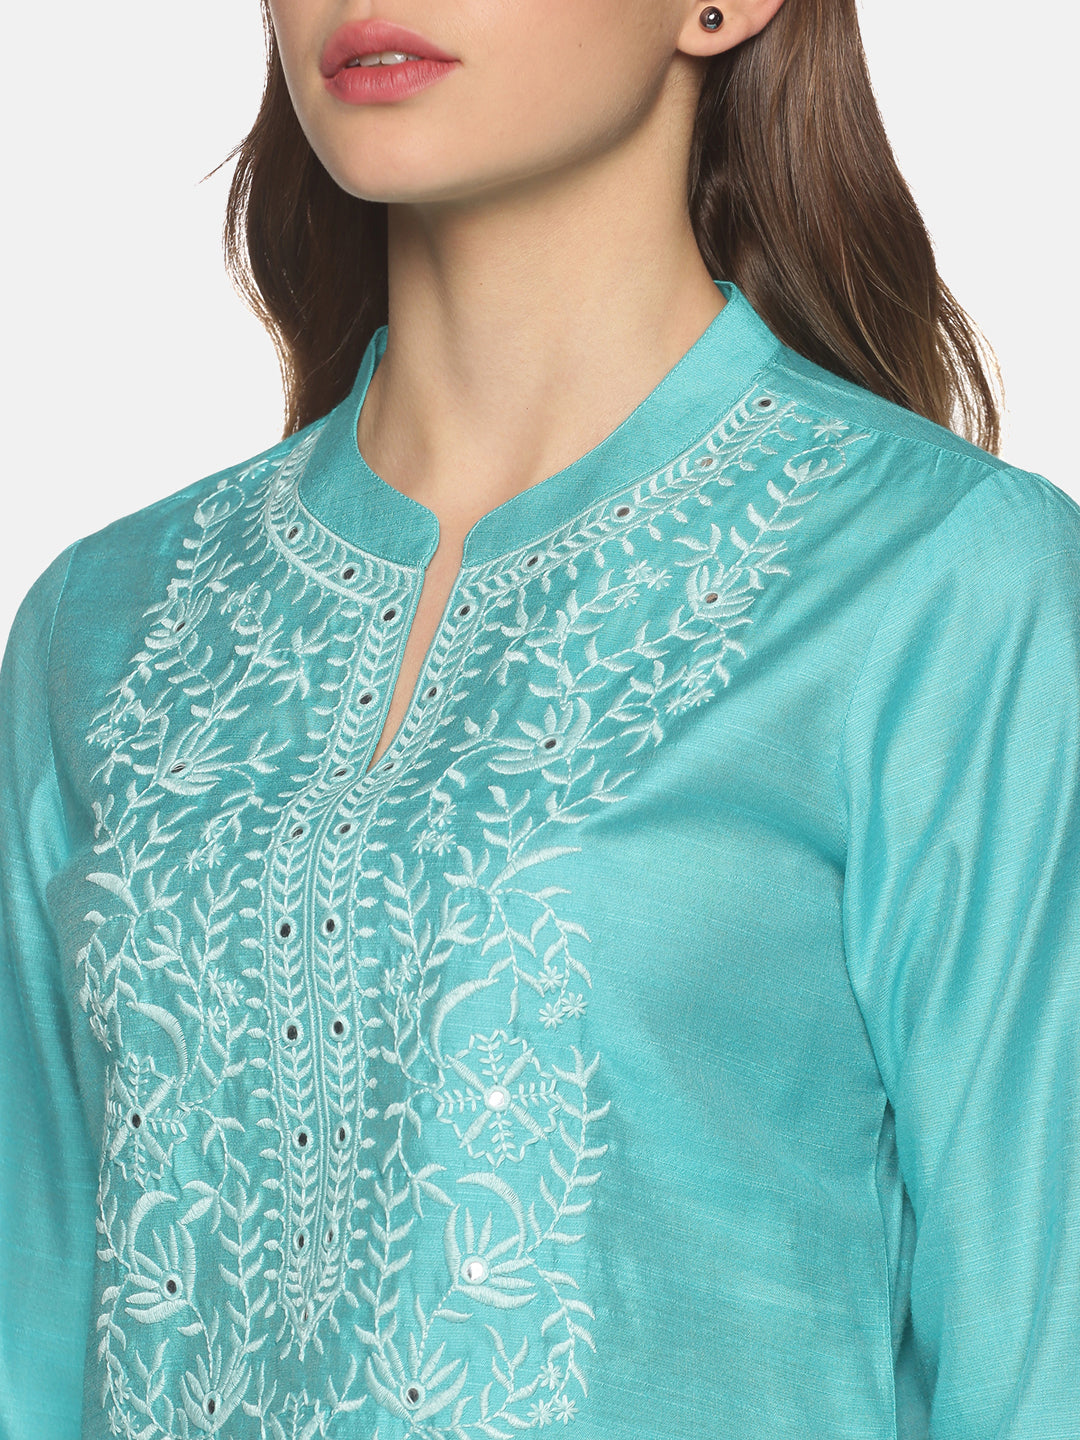 Turquoise Blue Art Raw Silk Tunic with Floral Embroidered Neck & Mirror Accents